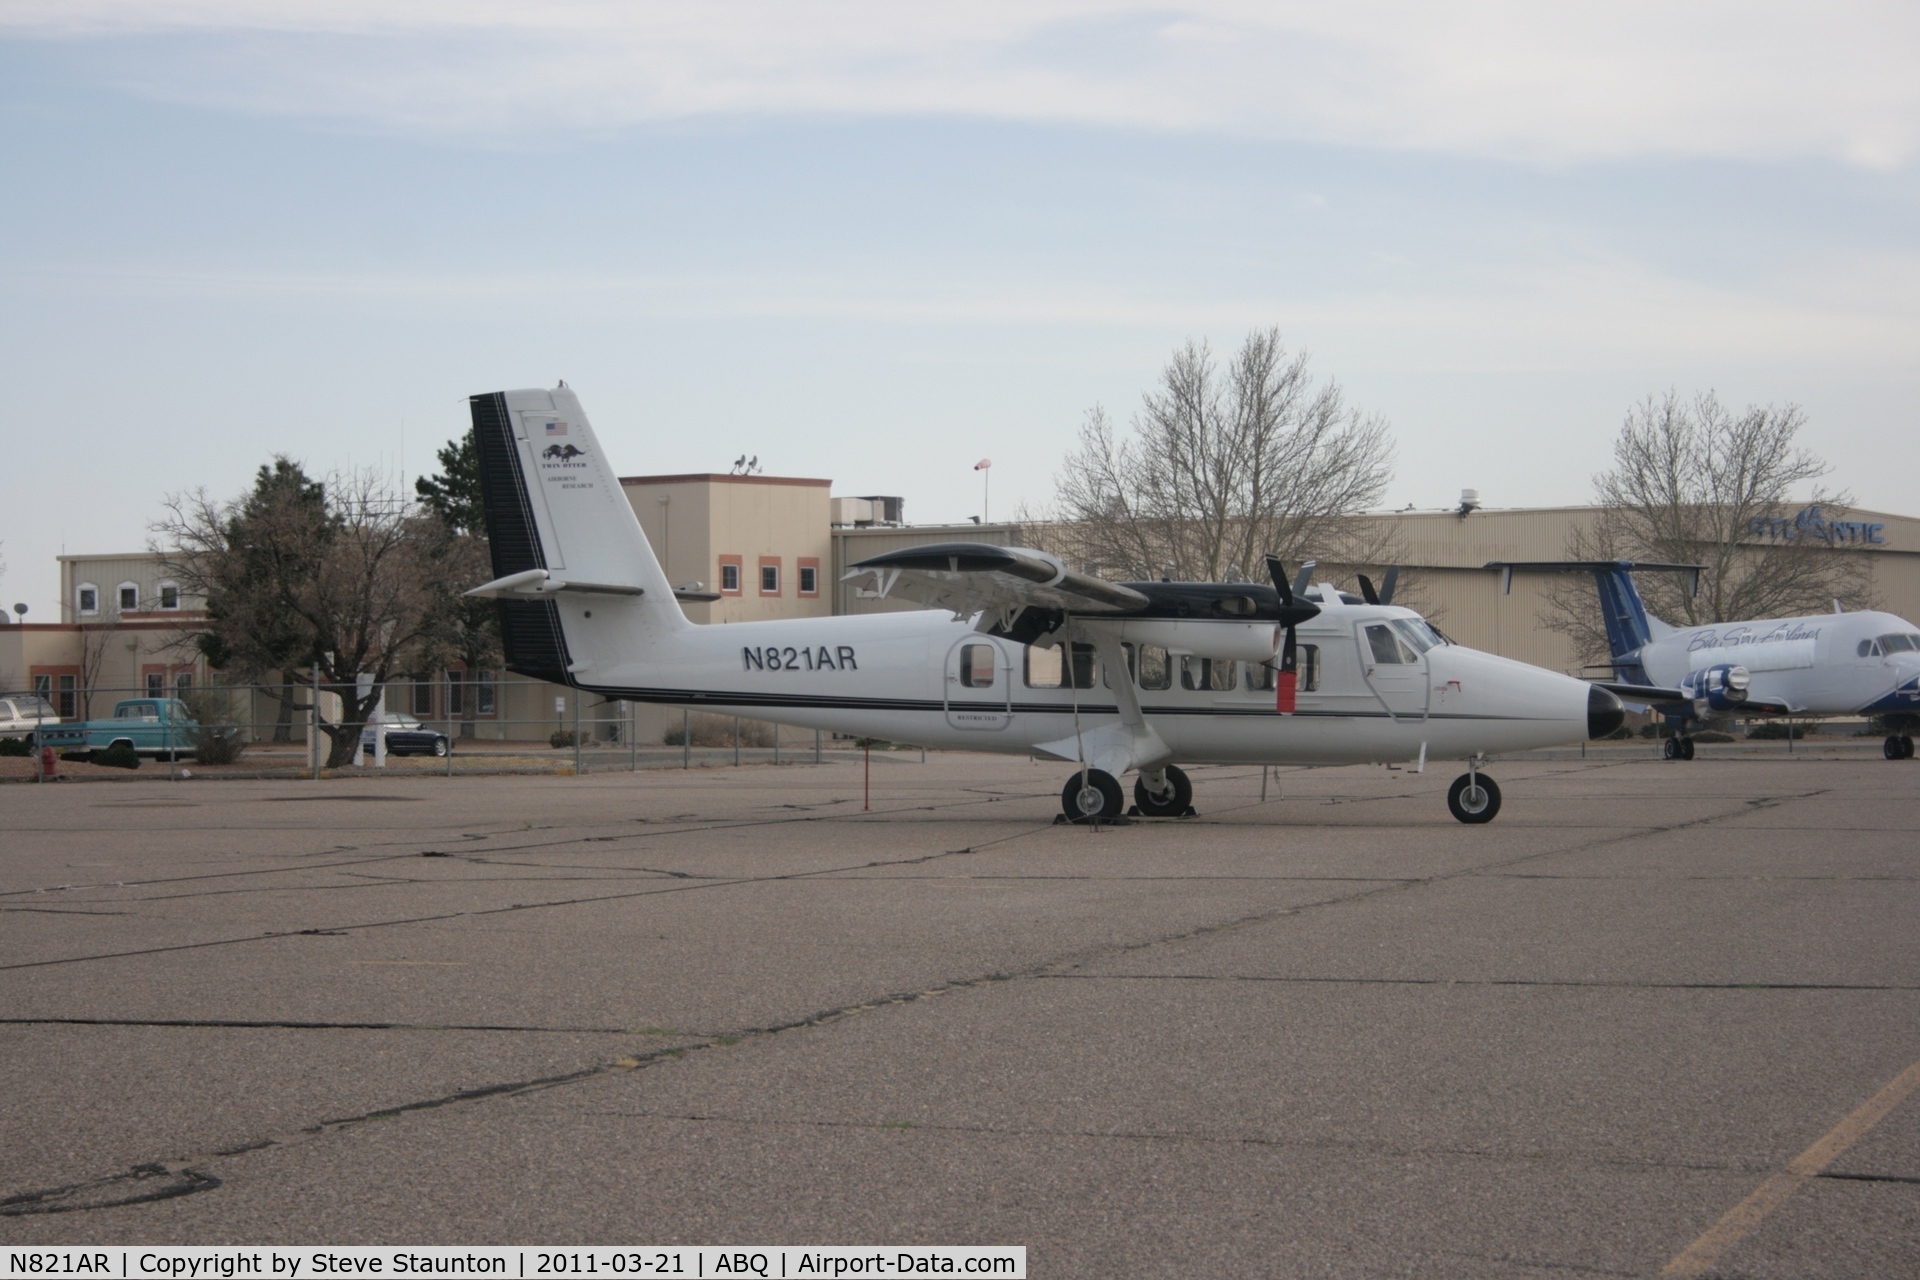 N821AR, 1974 De Havilland Canada DHC-6-300 Twin Otter C/N 421, Taken at Alburquerque International Sunport Airport, New Mexico in March 2011 whilst on an Aeroprint Aviation tour